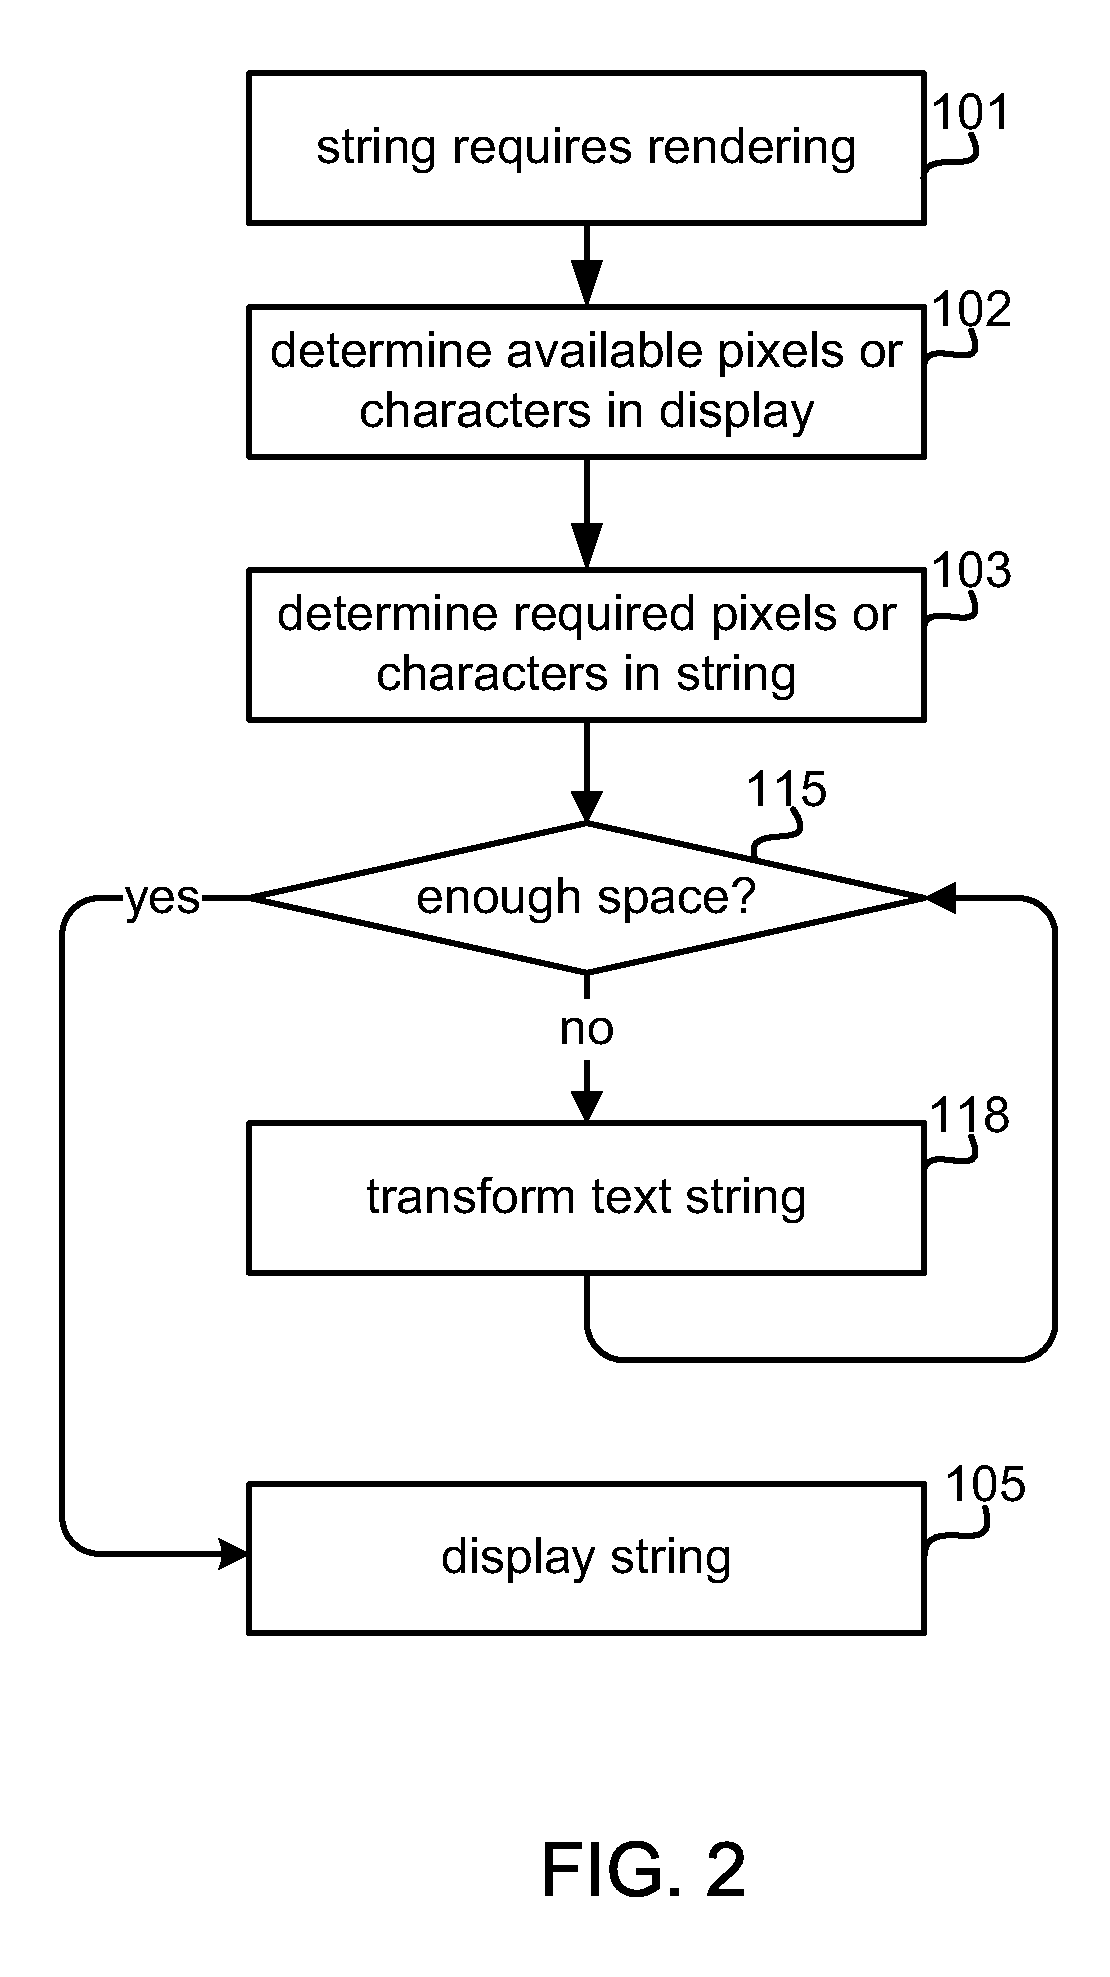 Method and apparatus for adjusting the length of text strings to fit display sizes